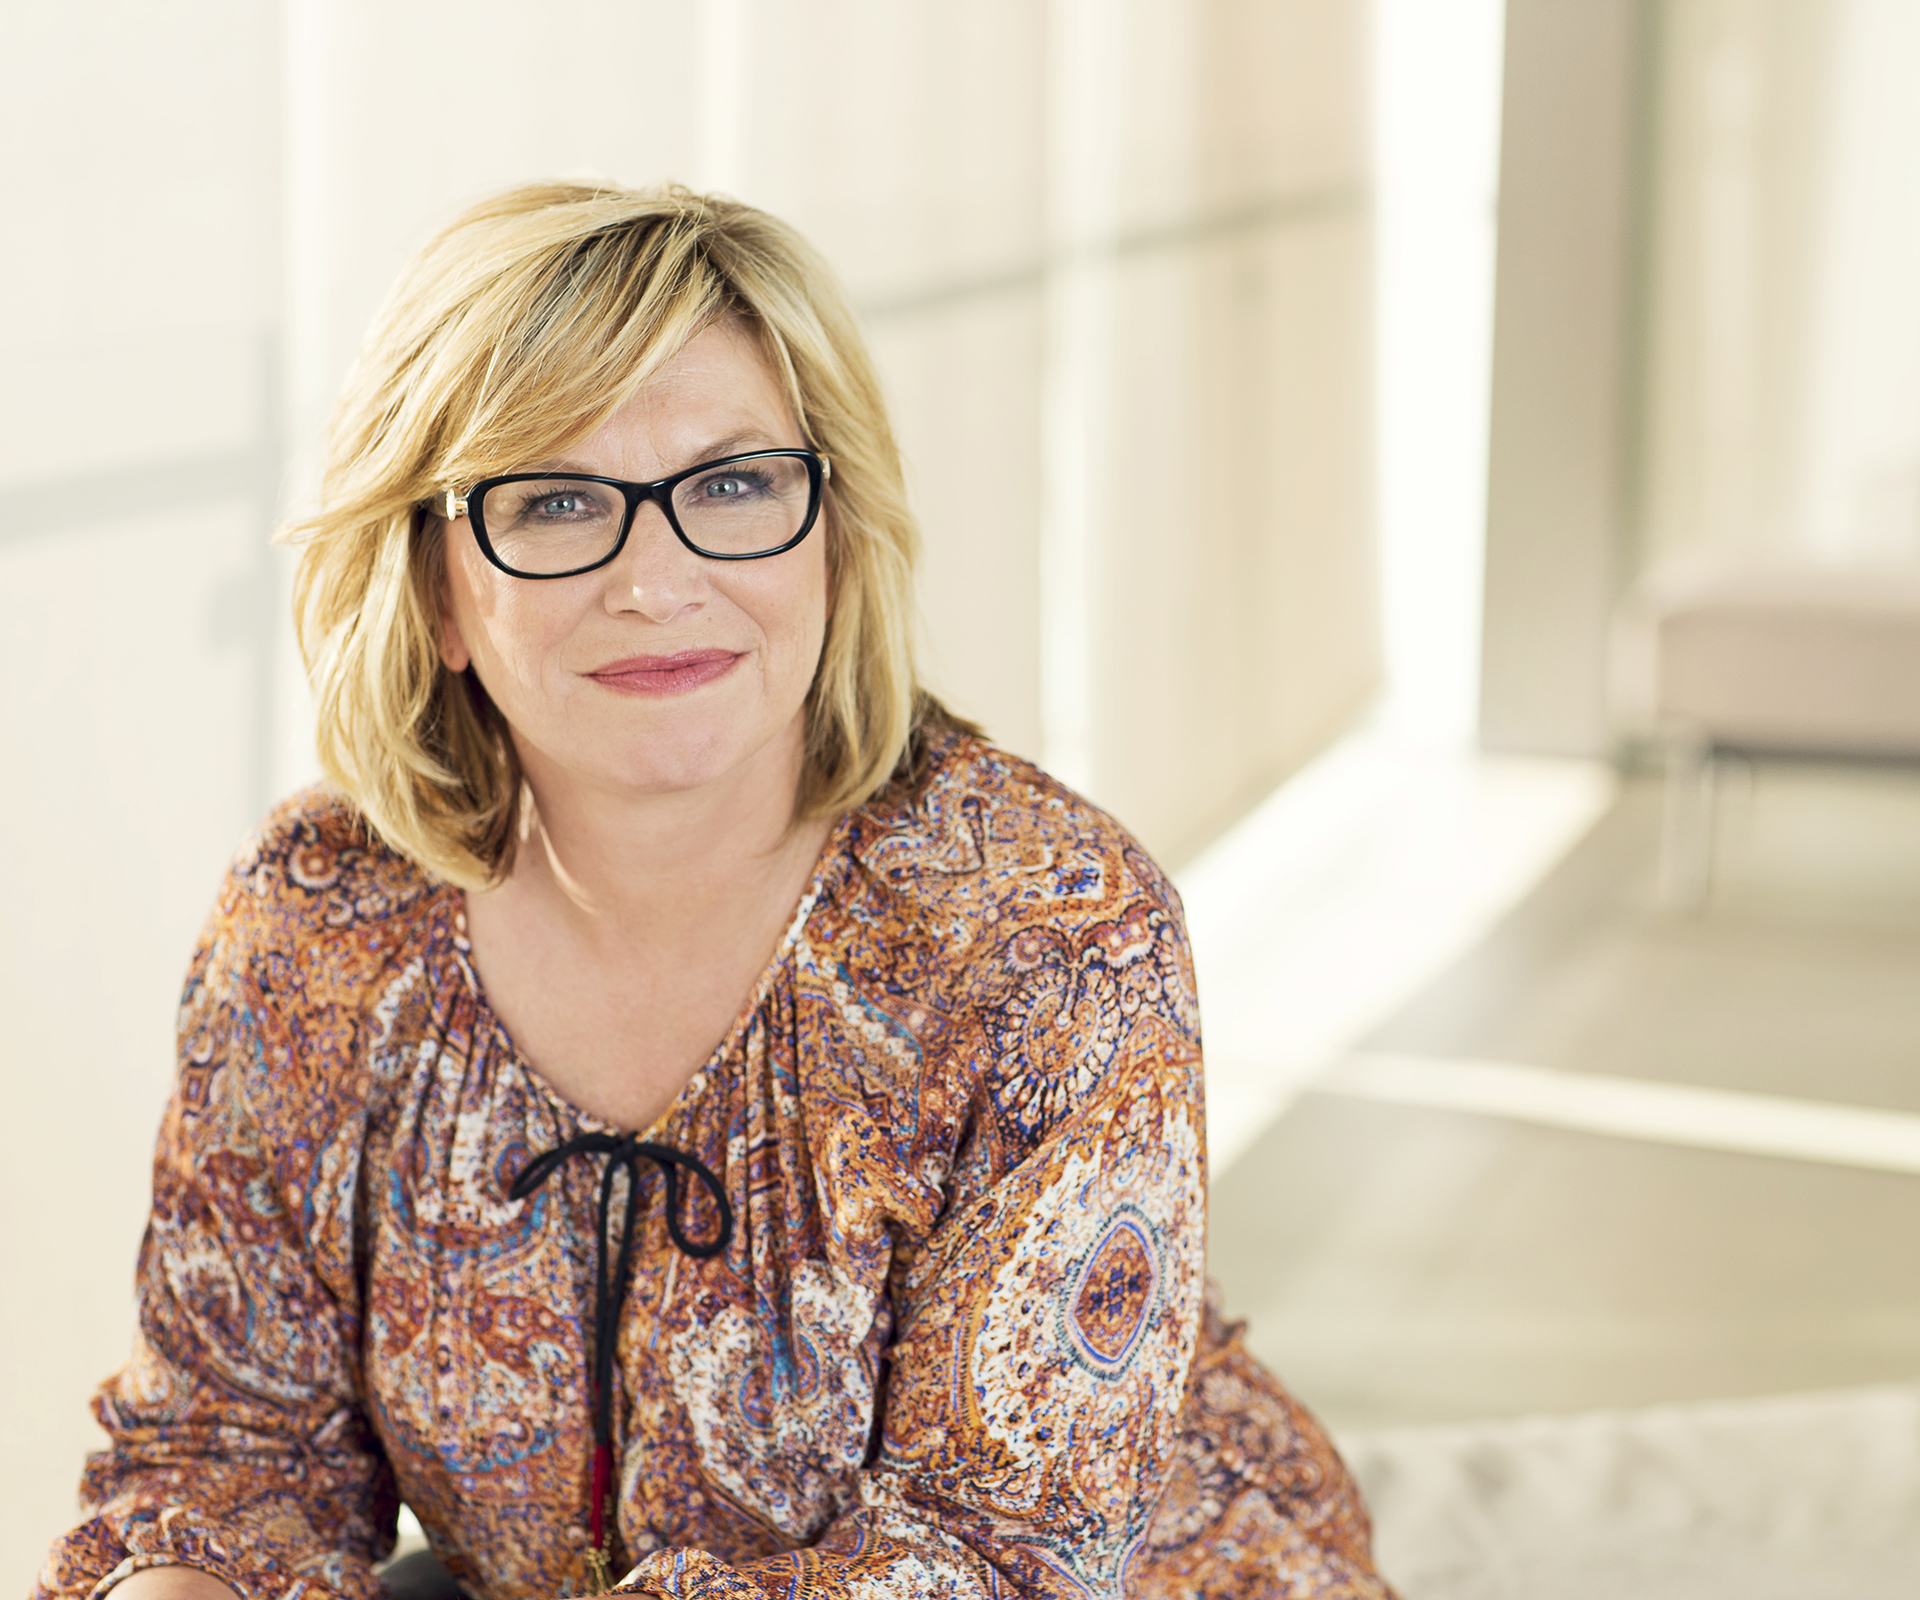 Australian of the year and Women's Weekly cover girl Rosie Batty